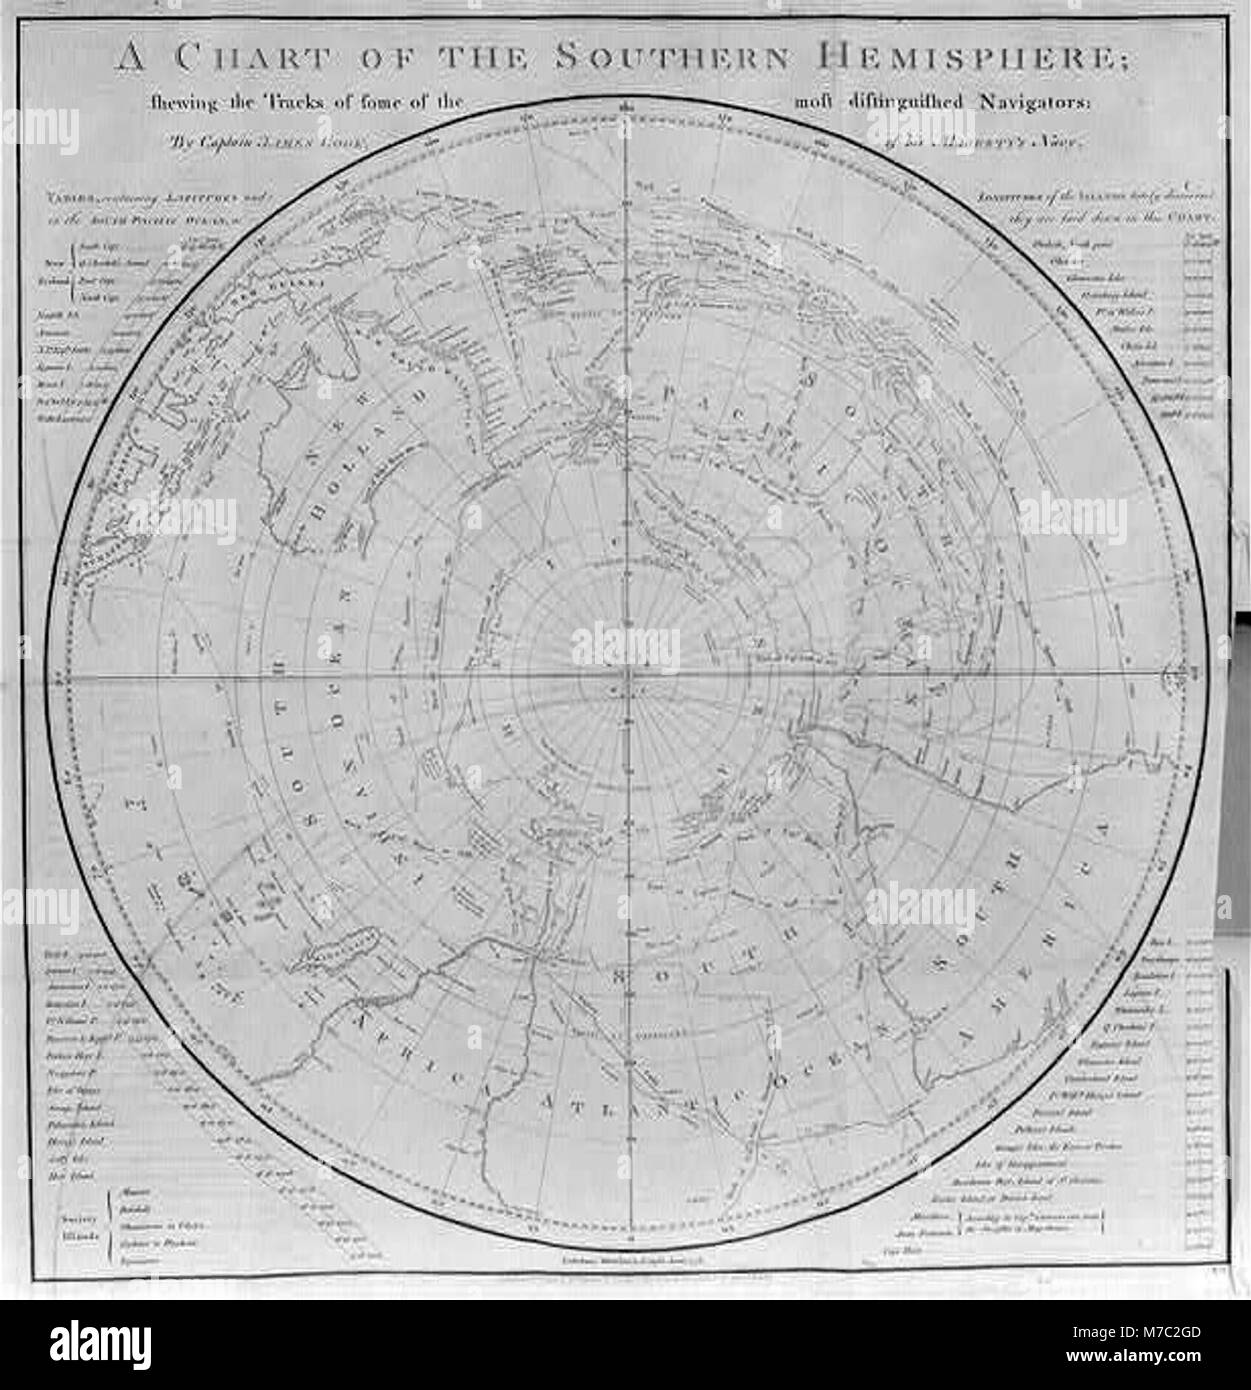 A Chart of the Southern Hemisphere showing the tracks of some of the most distinguished navigators, by Capt. James Cook LCCN2002699851 Stock Photo